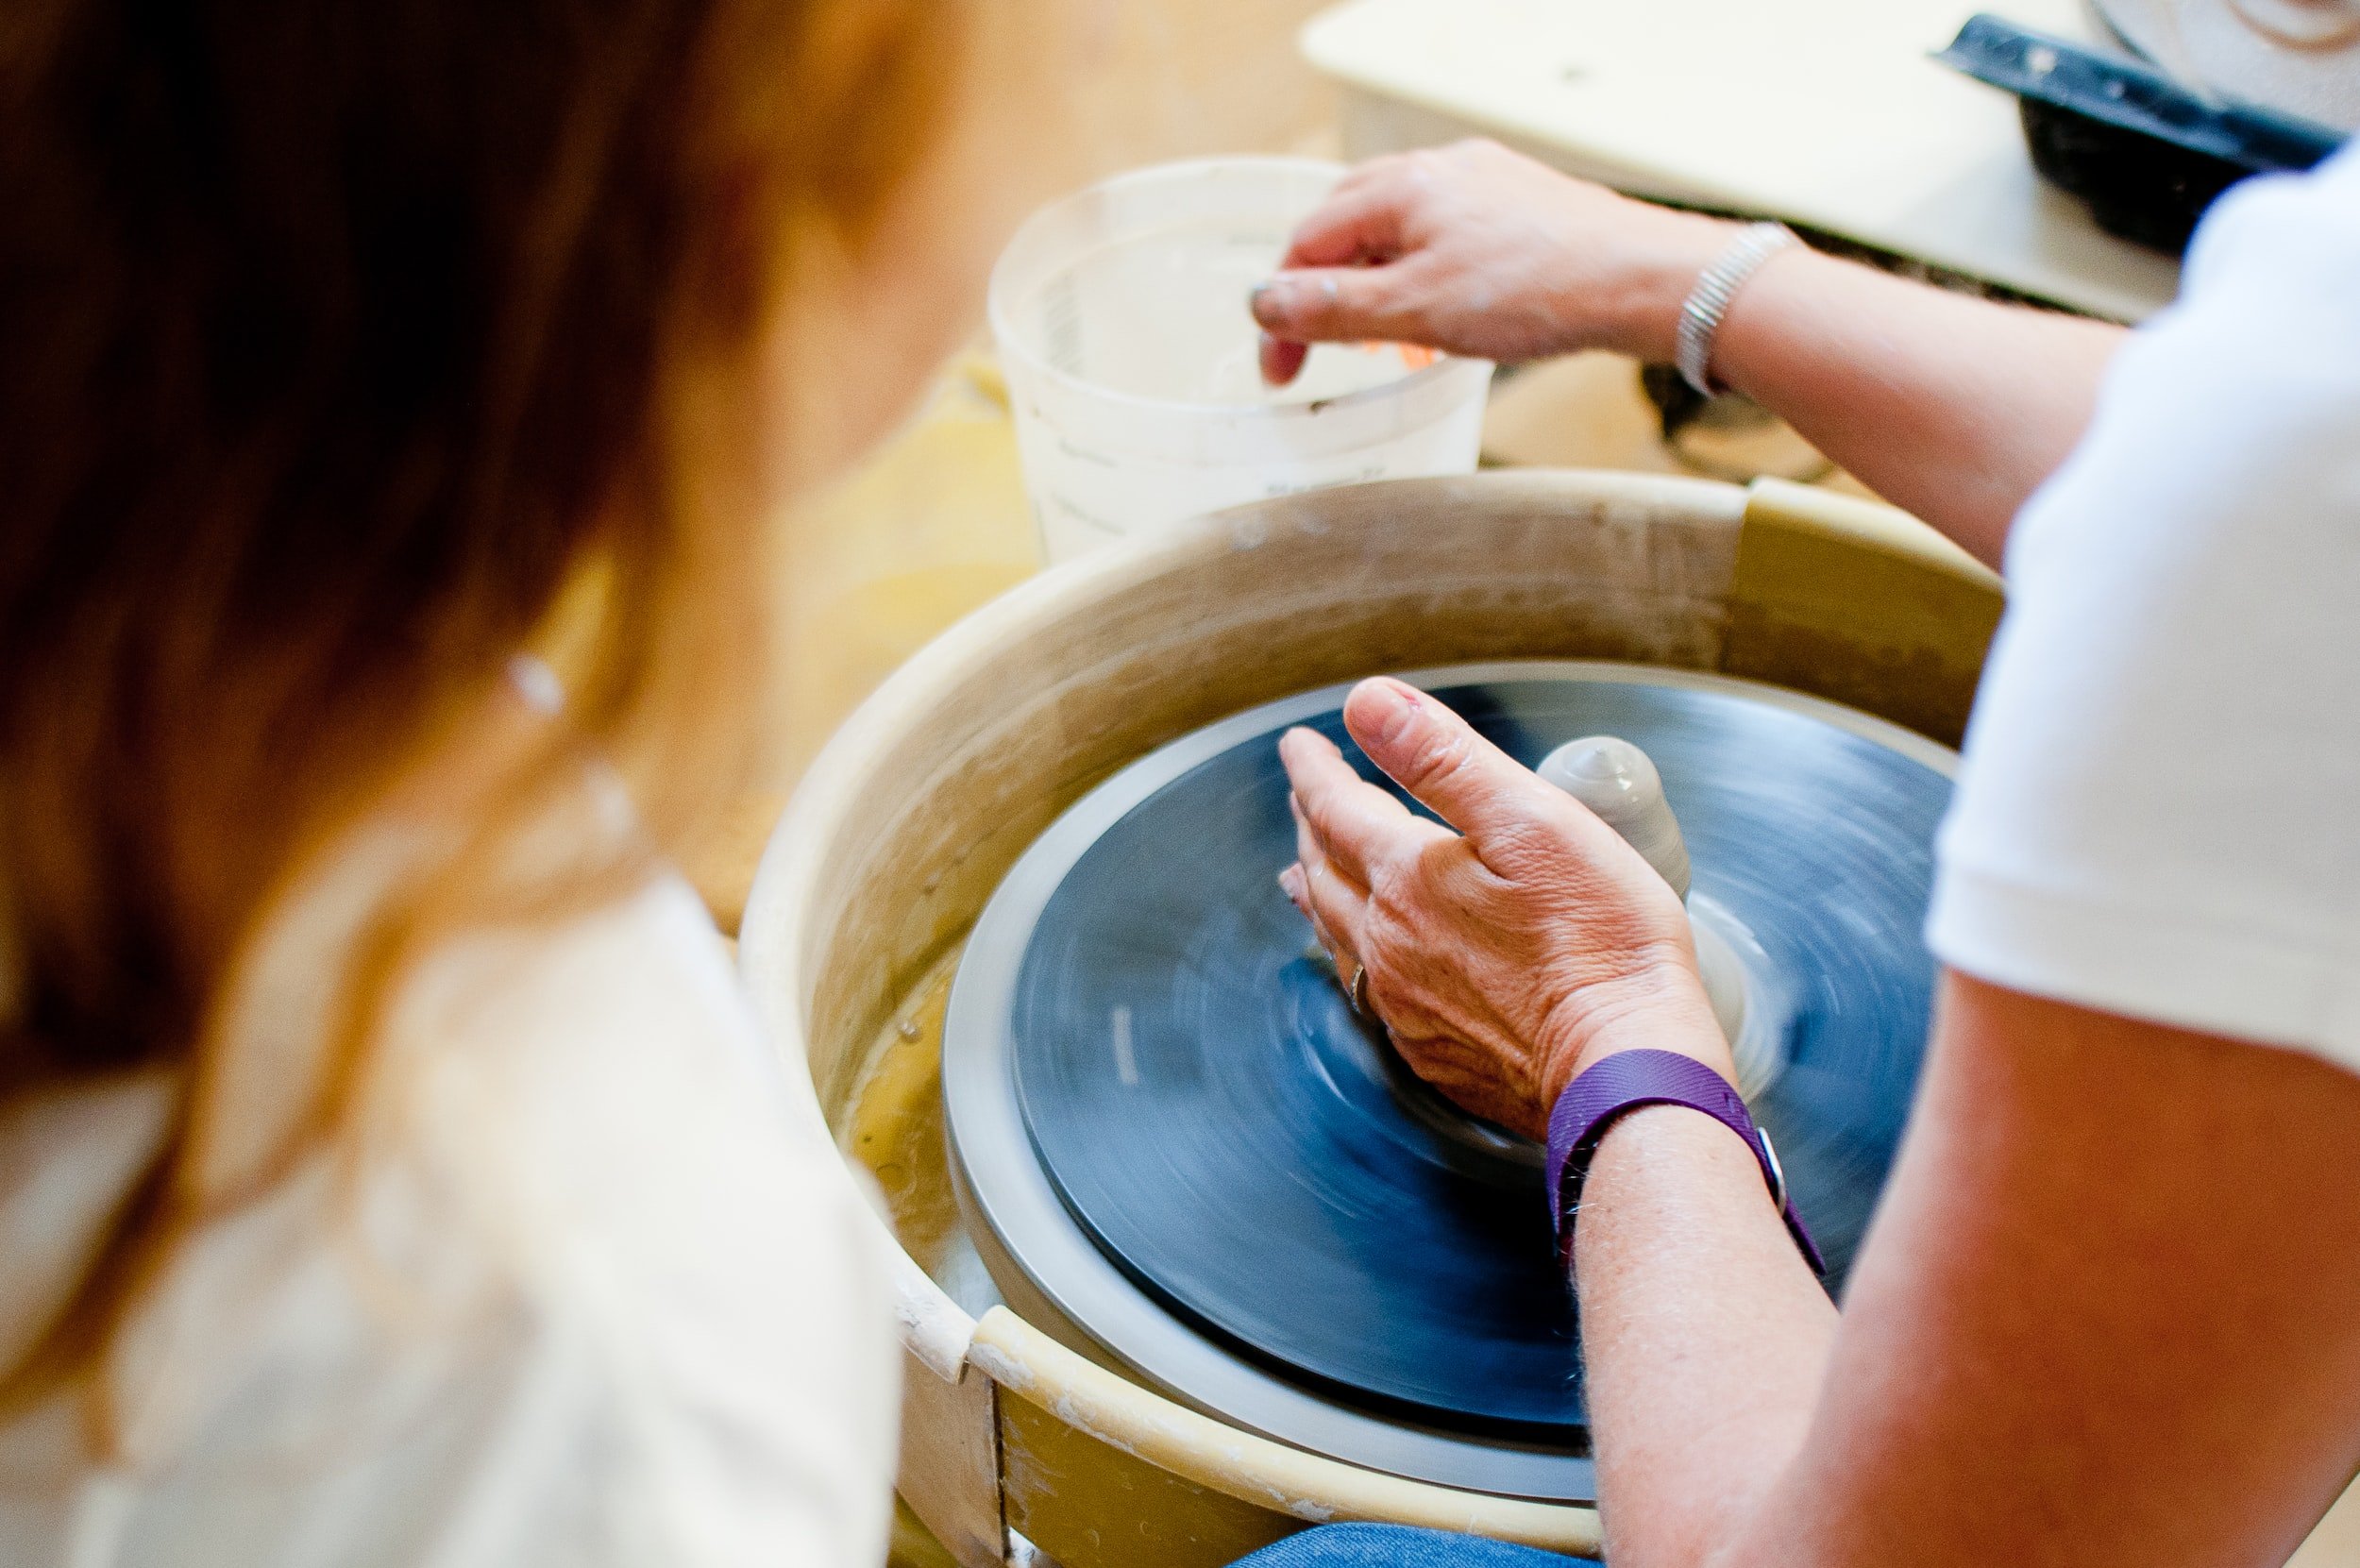 A Pottery Wheel Kit to Make & Paint Real Pots!